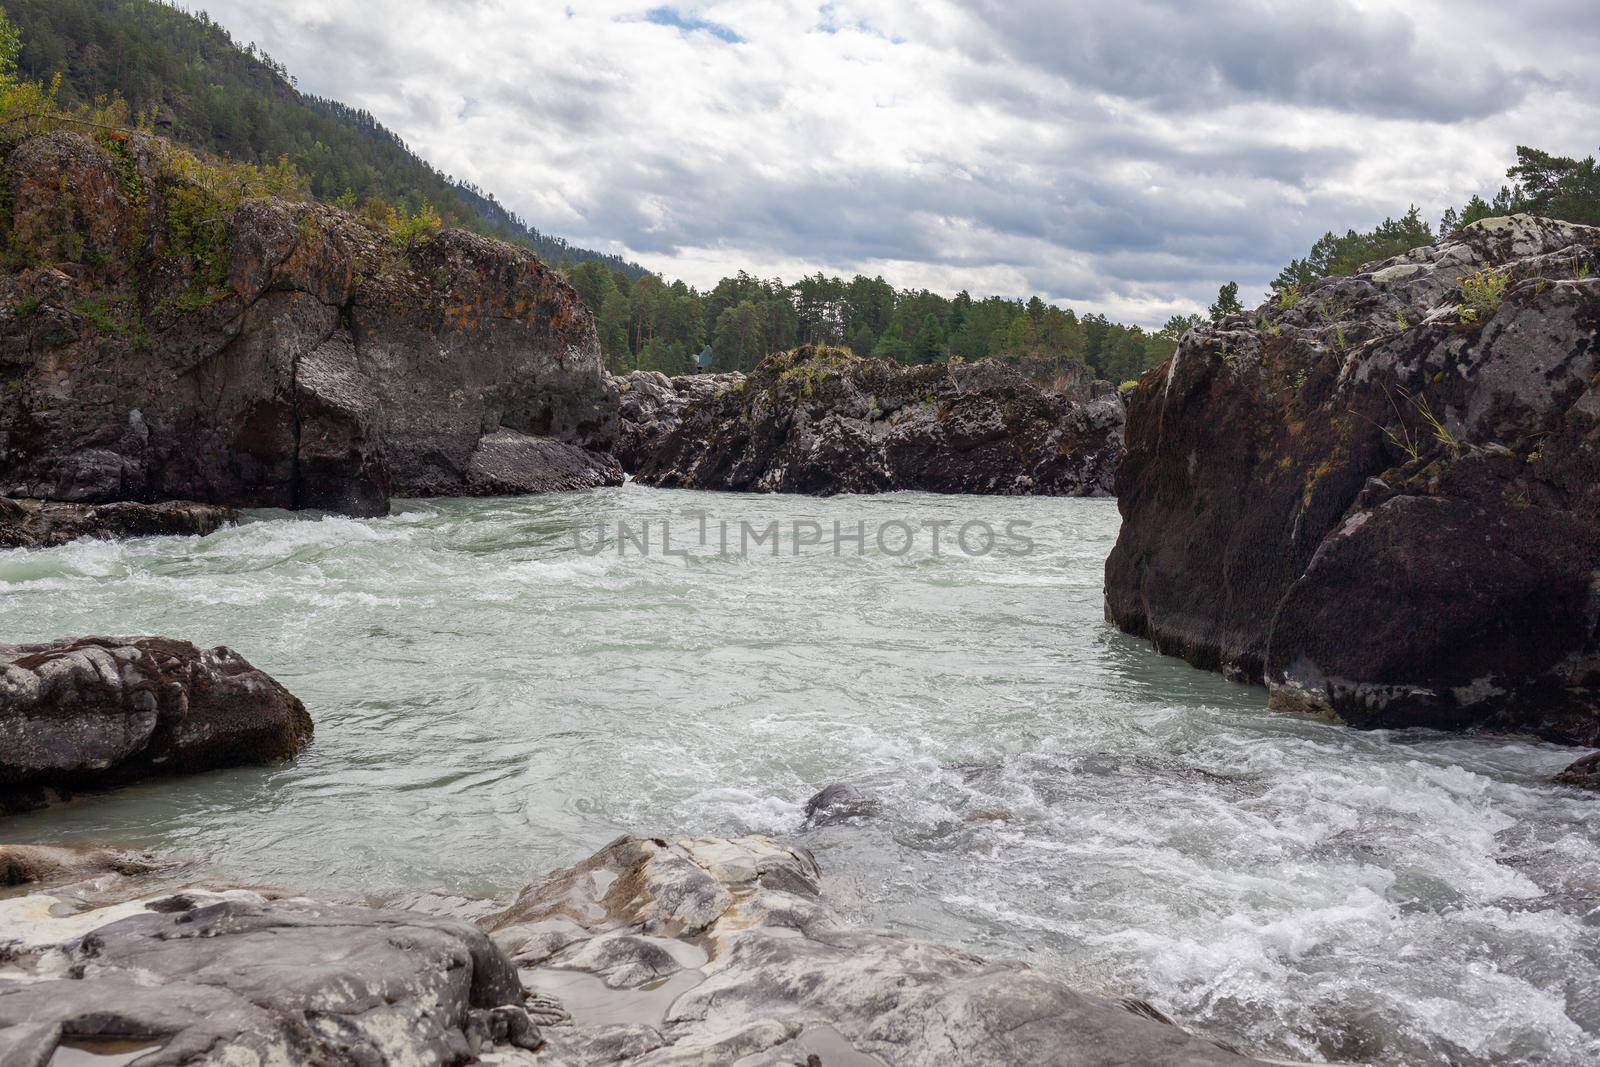 A fast-flowing wide and full-flowing mountain river. Large rocks stick out of the water. Big mountain river Katun, turquoise color, in the Altai Mountains, Altai Republic.